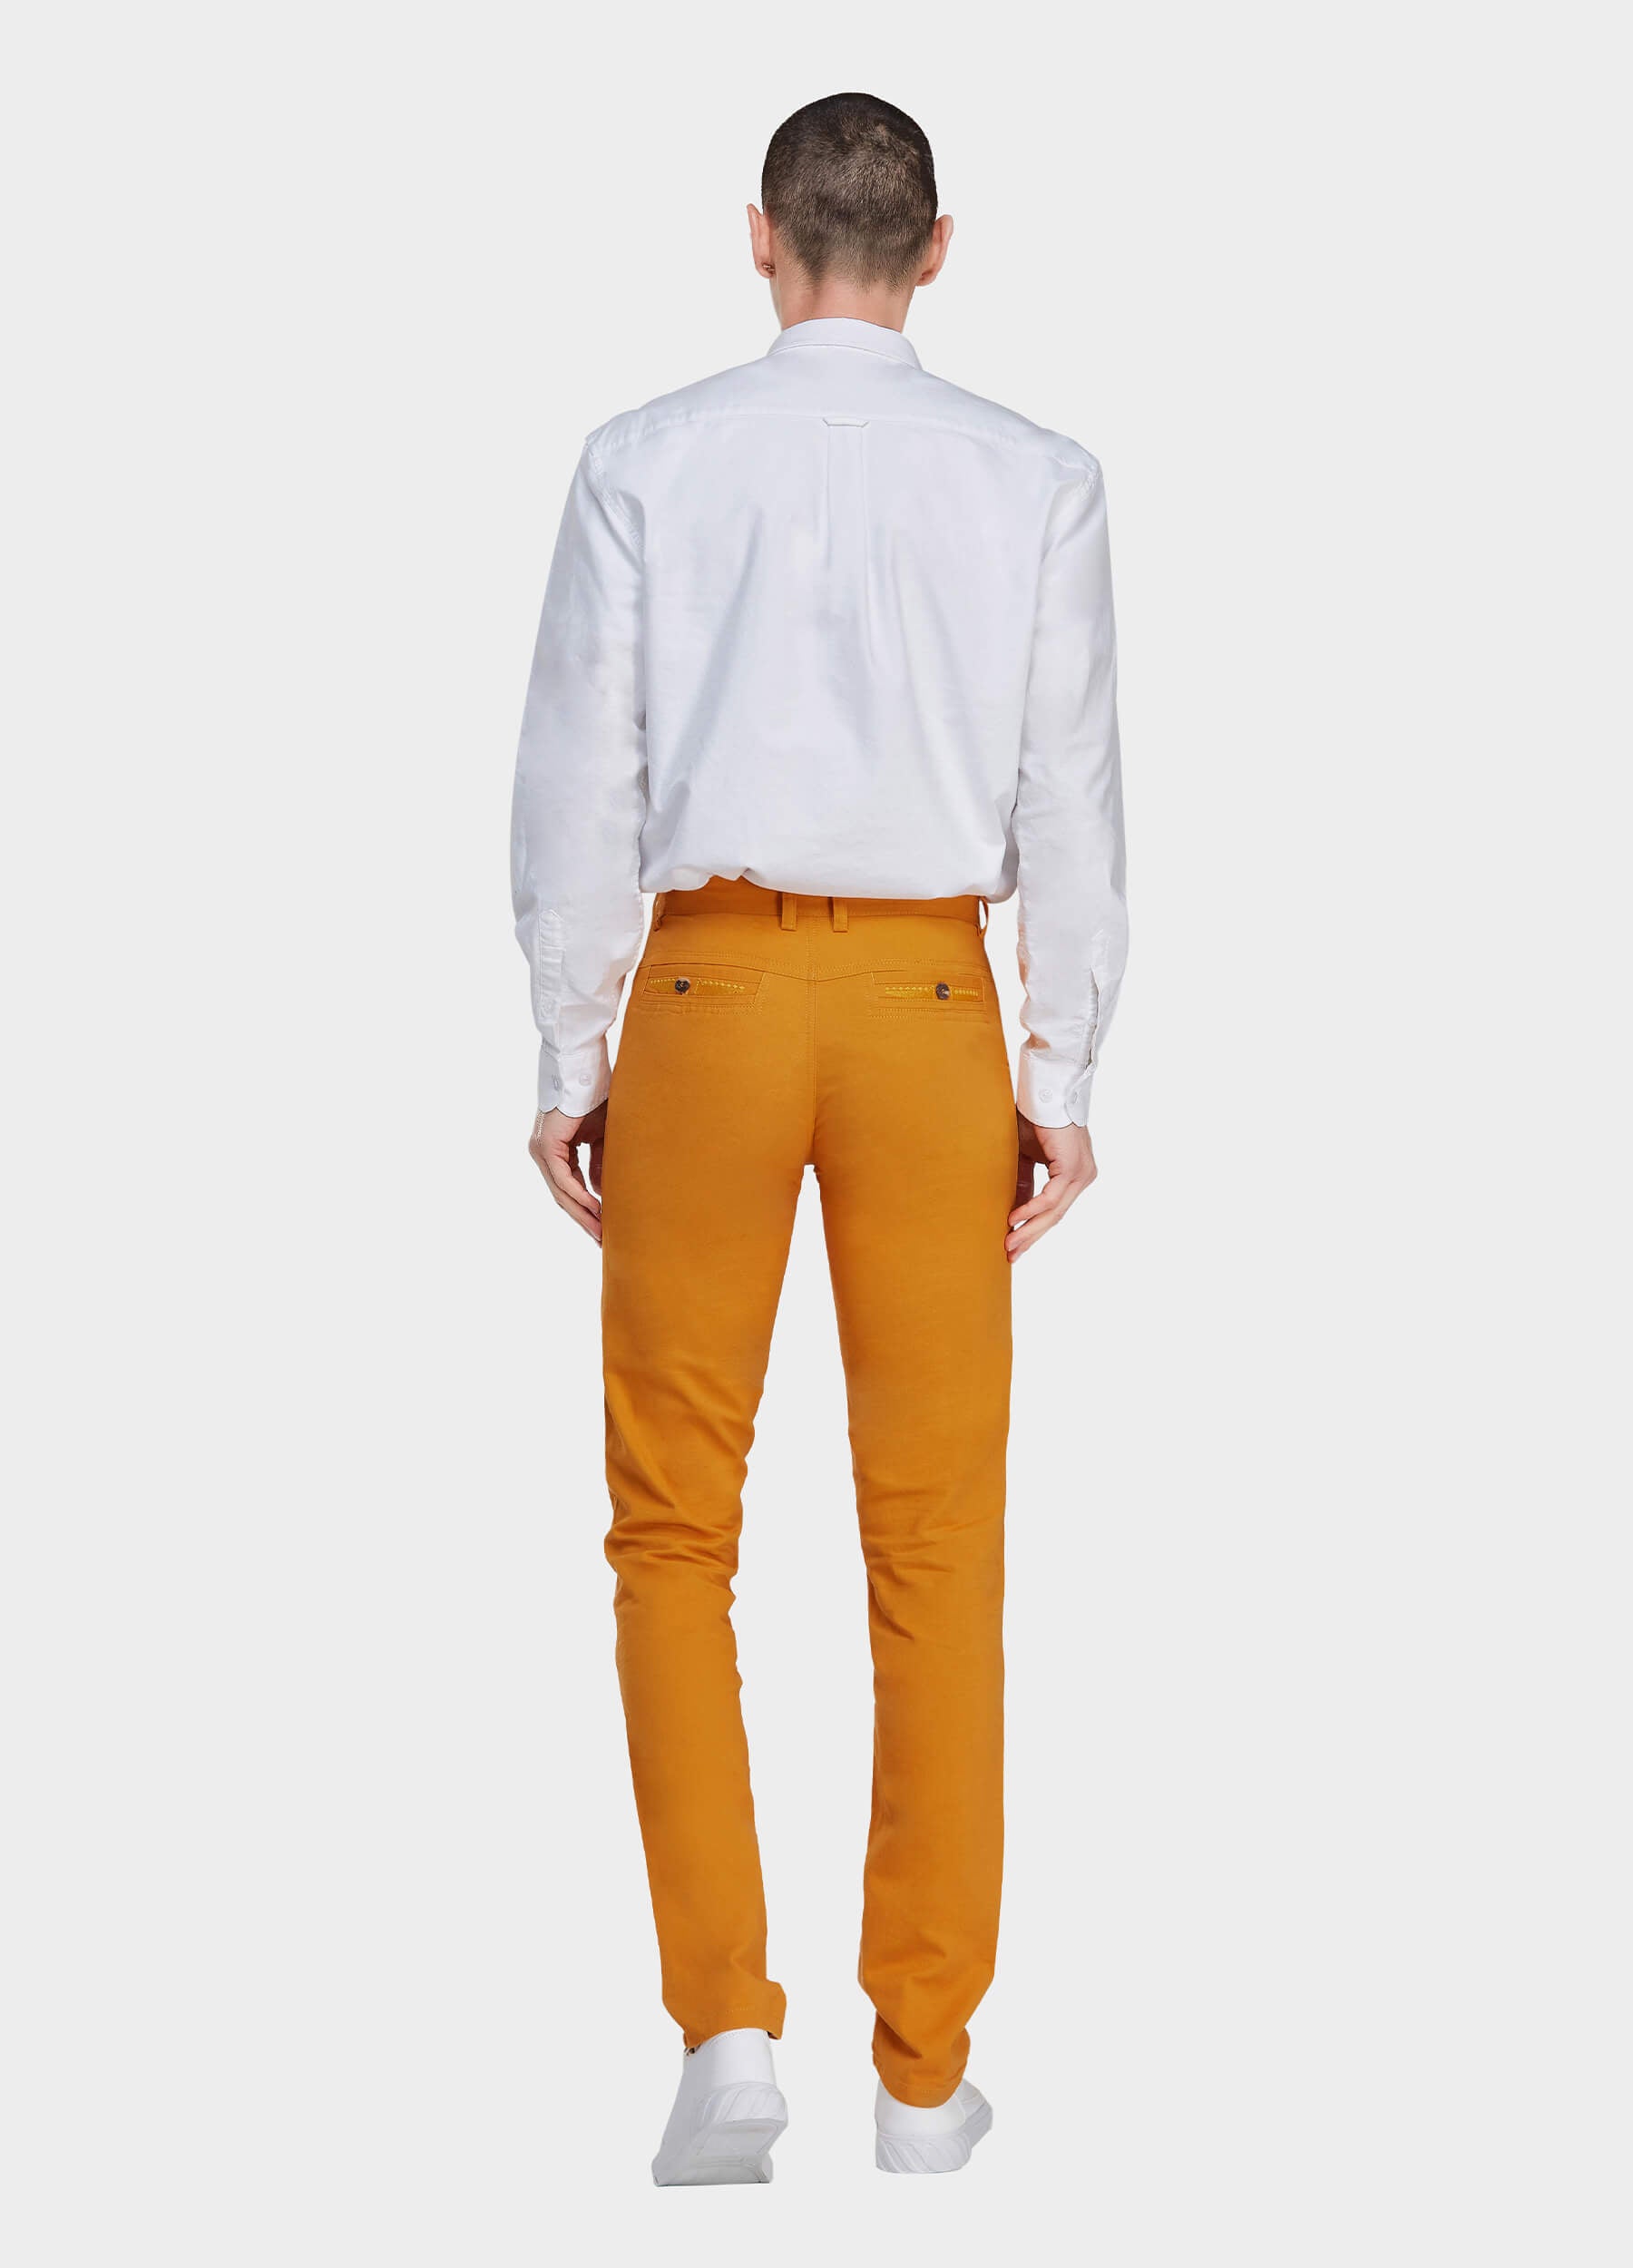 Men's Fall Straight Leg Zip Fly Button Closure Slant Pocket Casual Trousers-Yellow back view